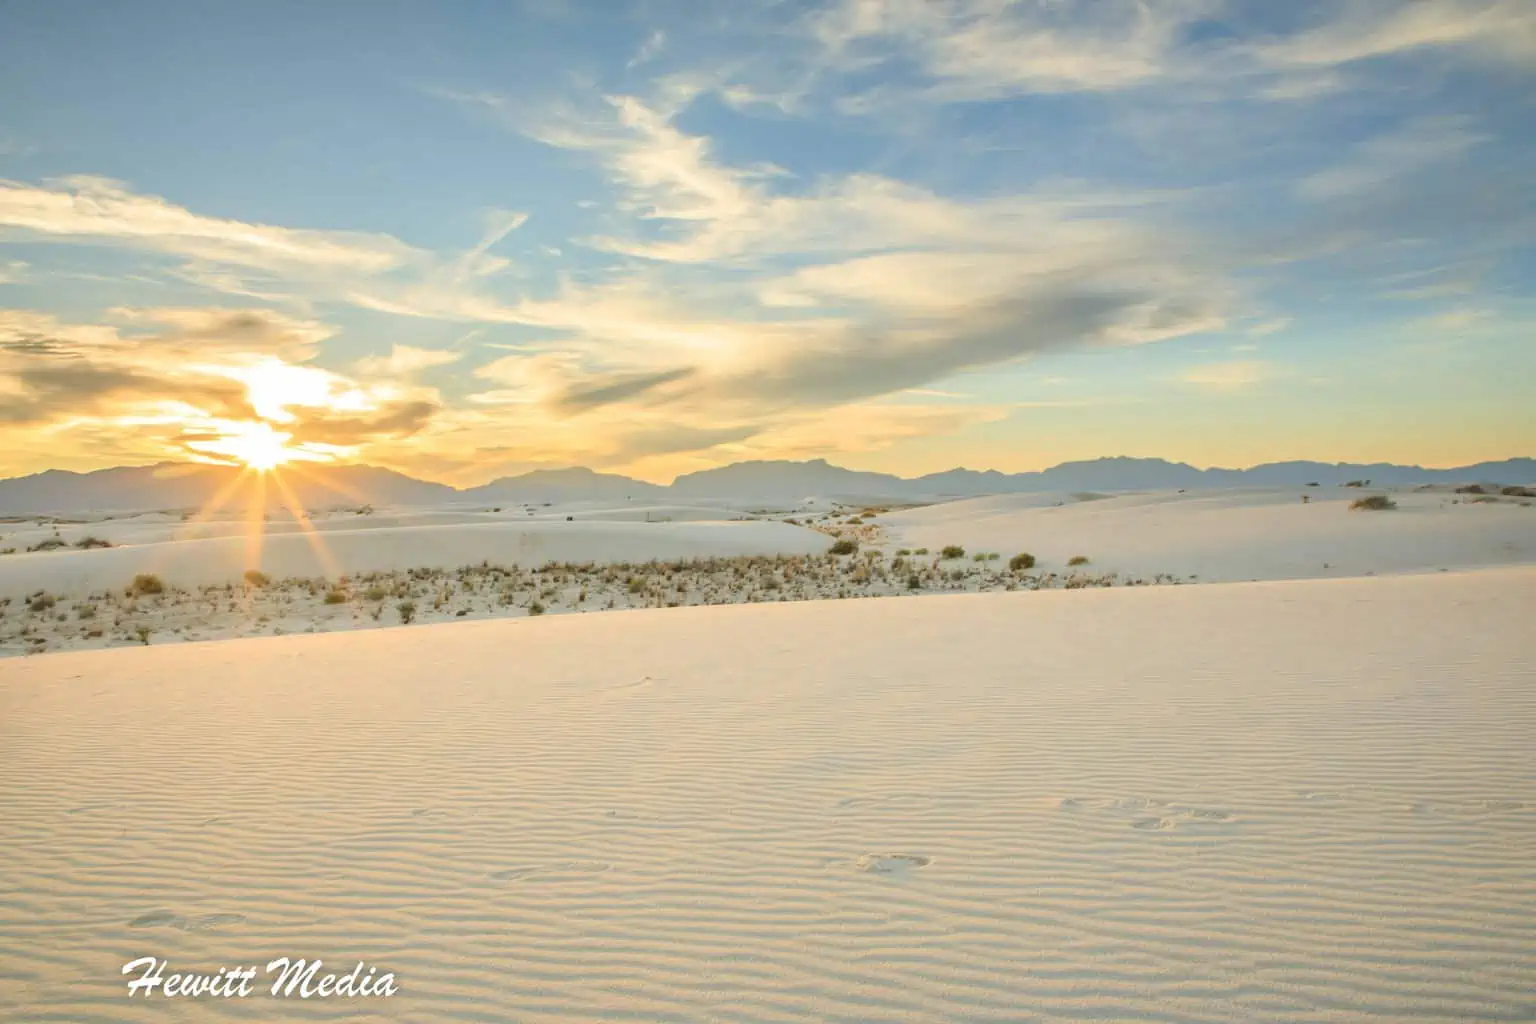 It’s About Time – White Sands Named America’s 62nd National Park